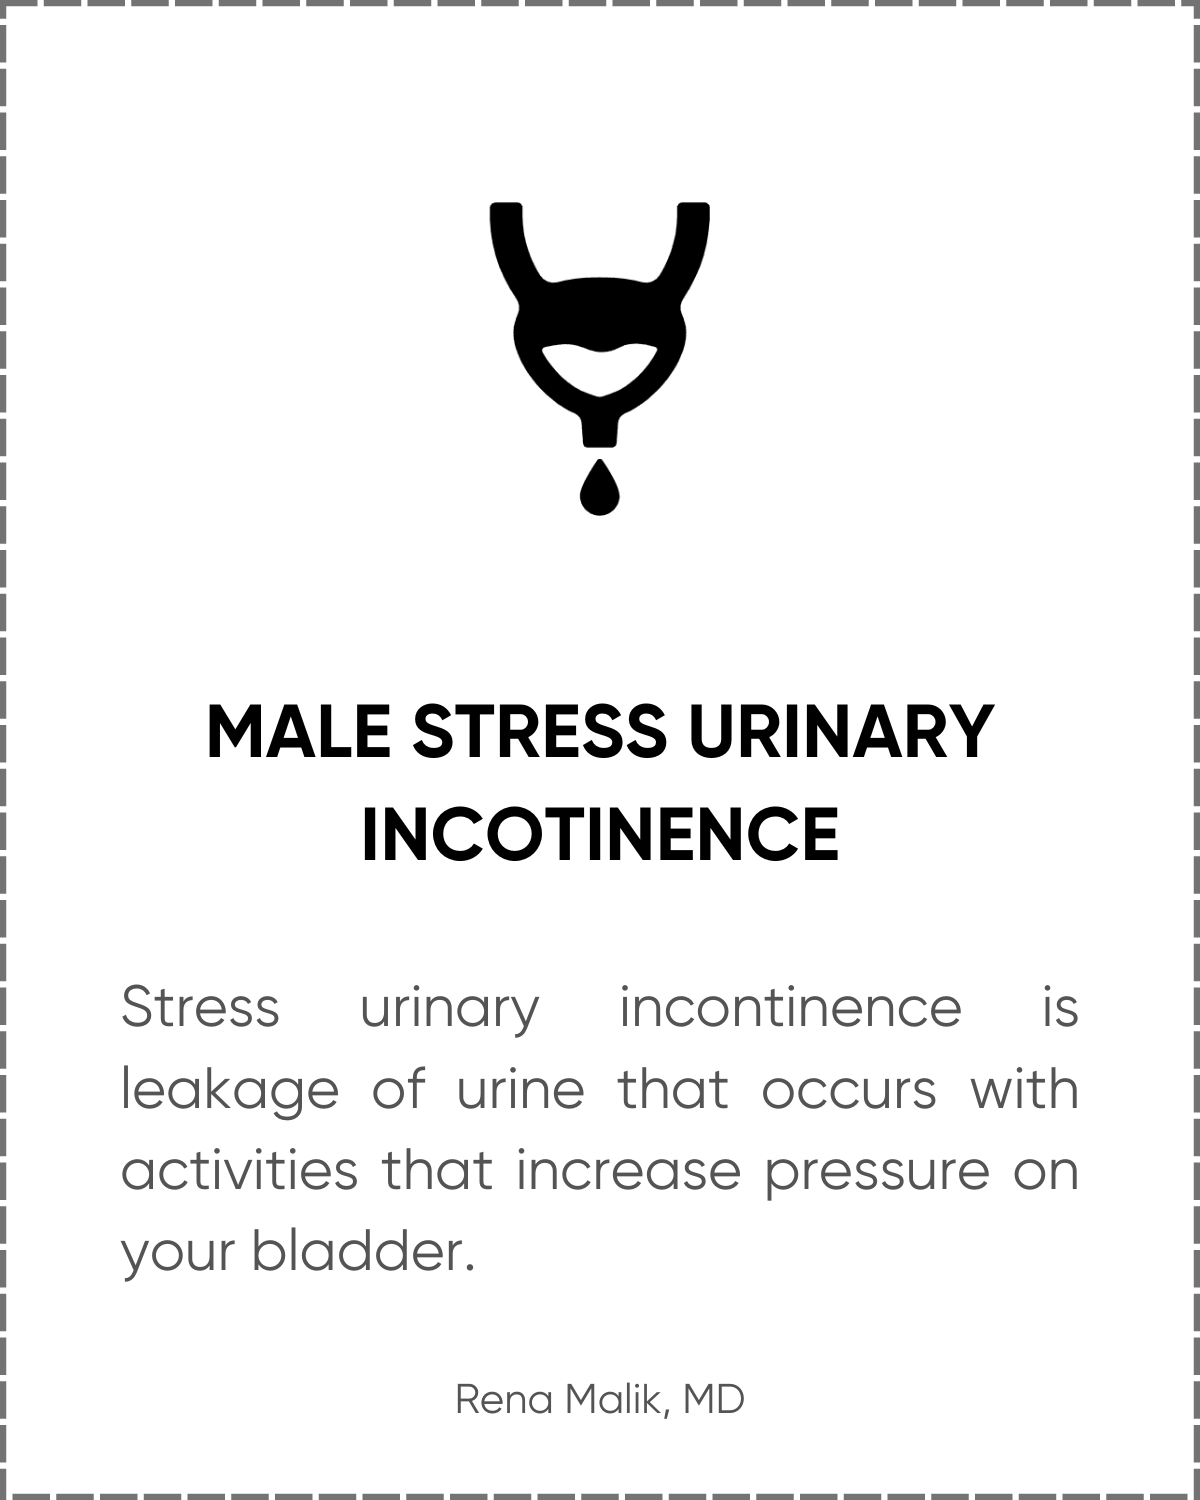 MALE STRESS URINARY INCOTINENCE